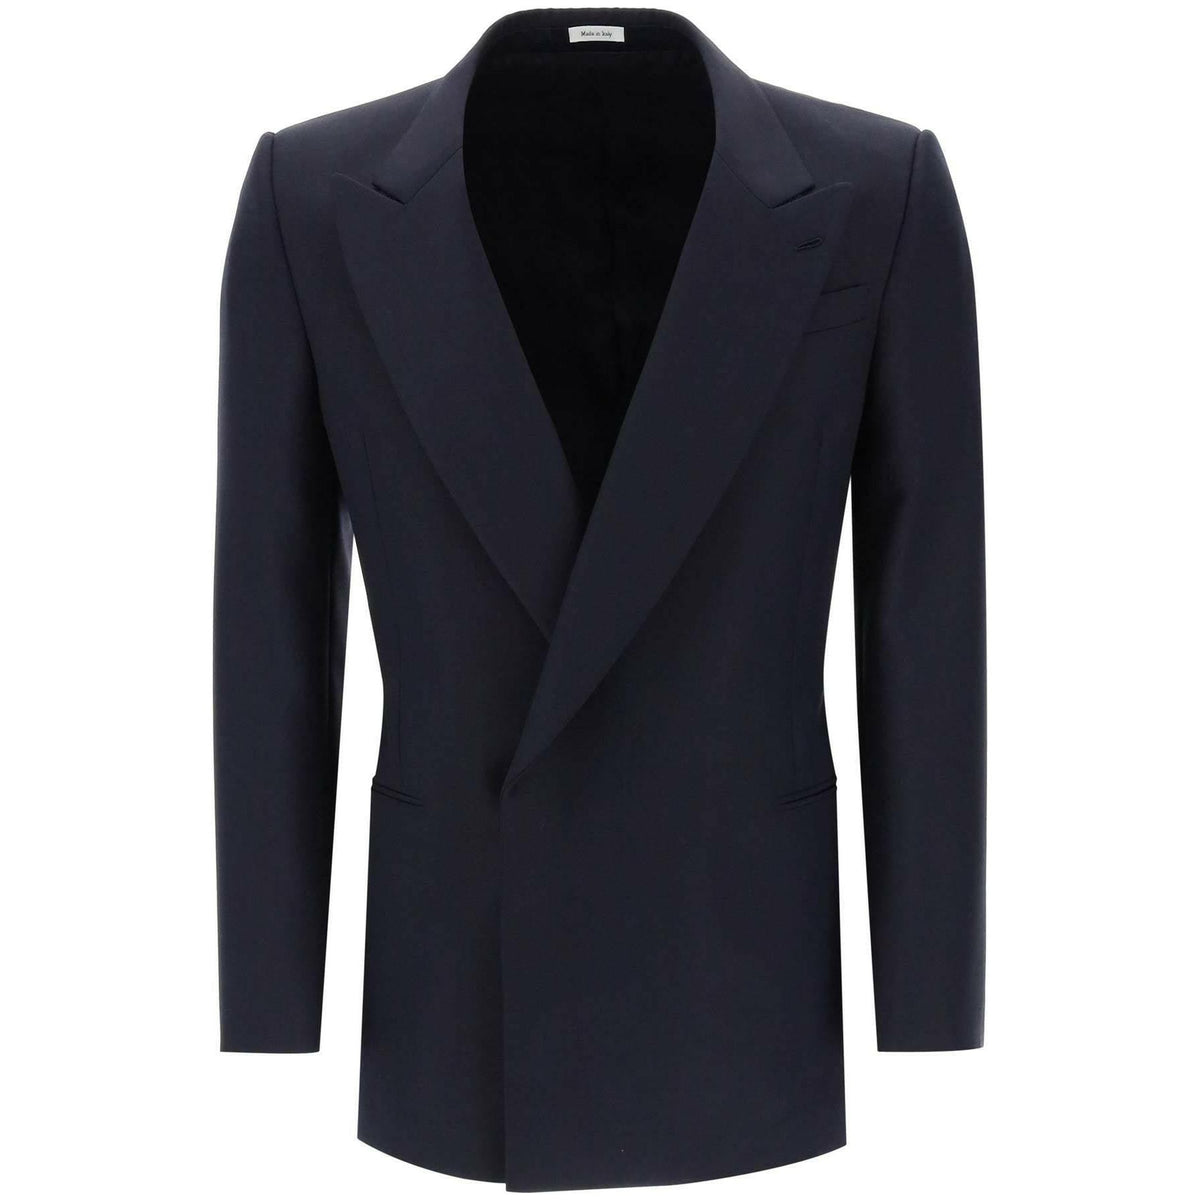 ALEXANDER MCQUEEN - Navy Wool Mohair Concealed Button Double-Breasted Blazer - JOHN JULIA